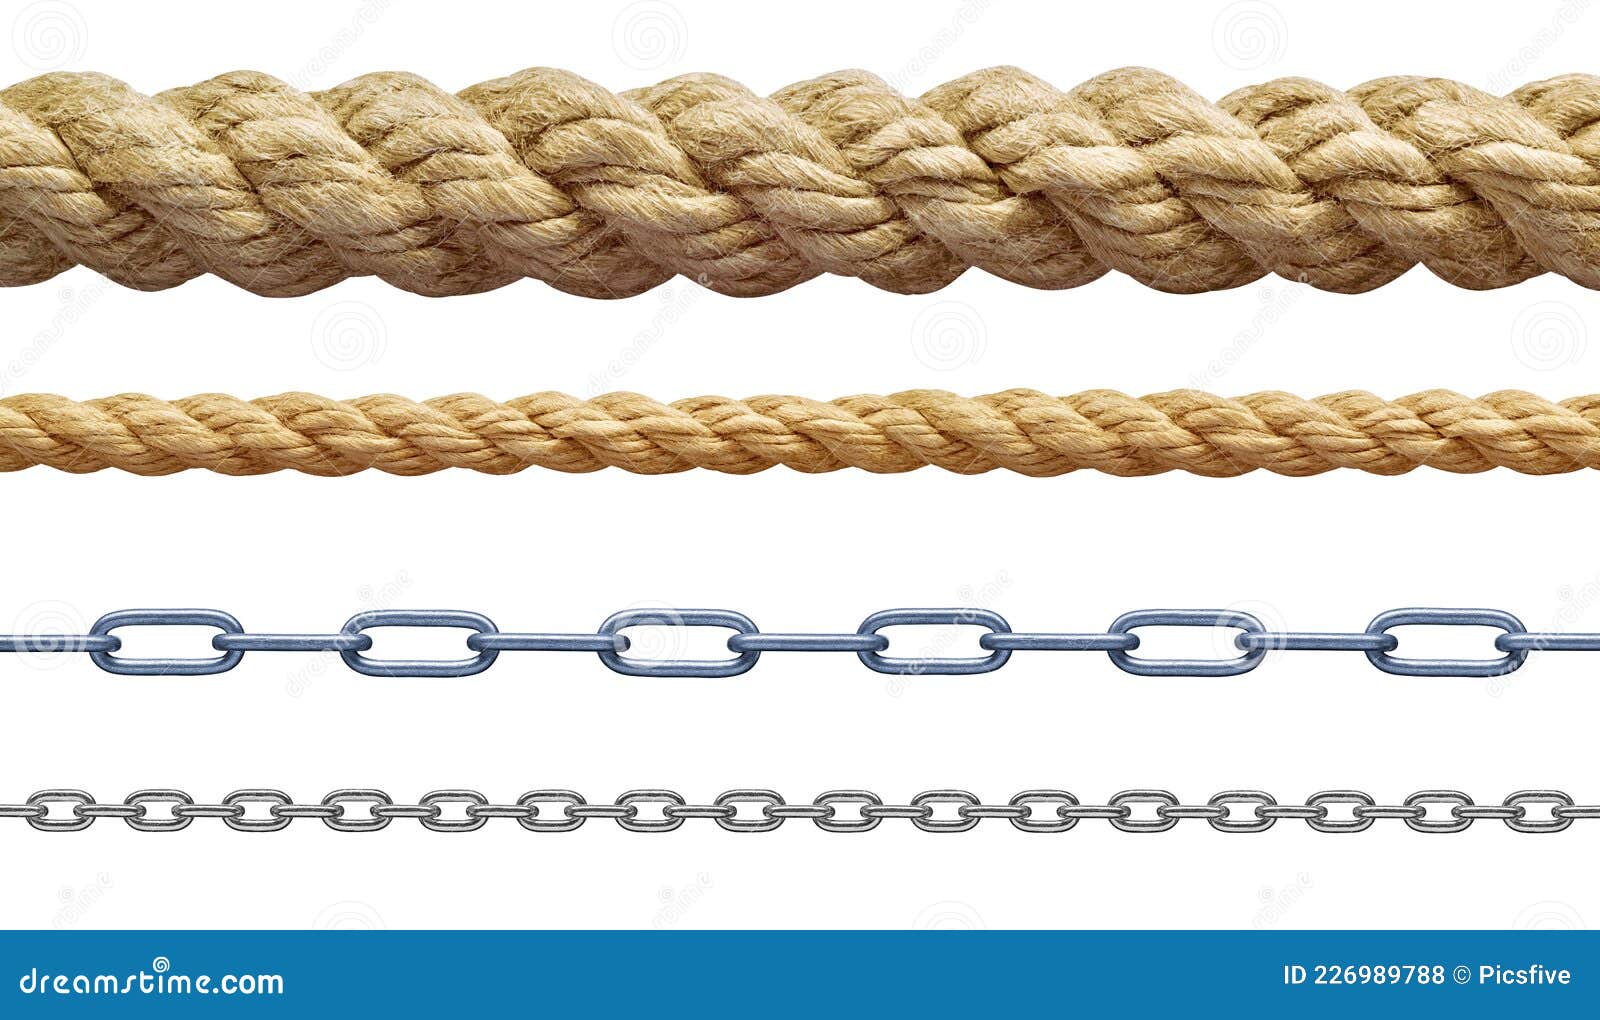 https://thumbs.dreamstime.com/z/collection-various-rope-chain-white-background-each-one-shot-separately-string-rope-chain-metal-link-steel-cord-cable-226989788.jpg